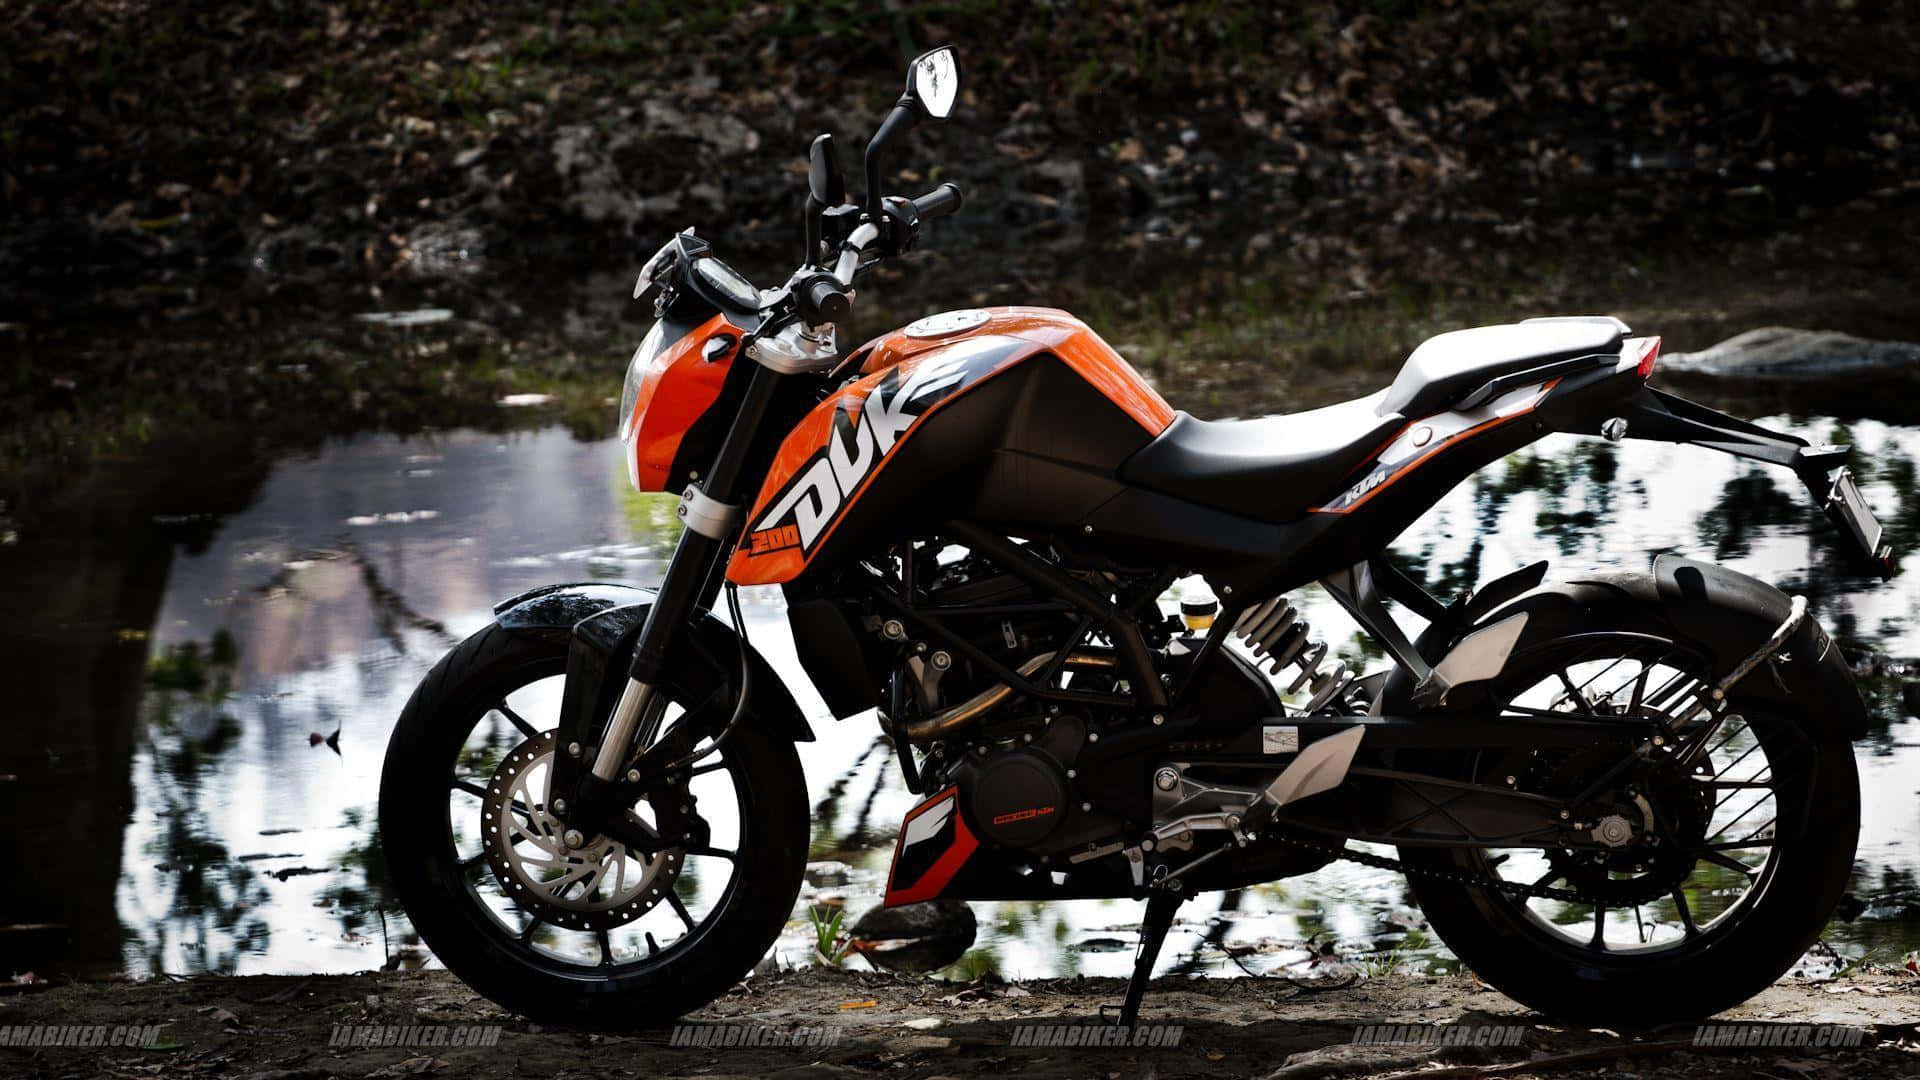 Get Ready for the Ride on KTM Bike